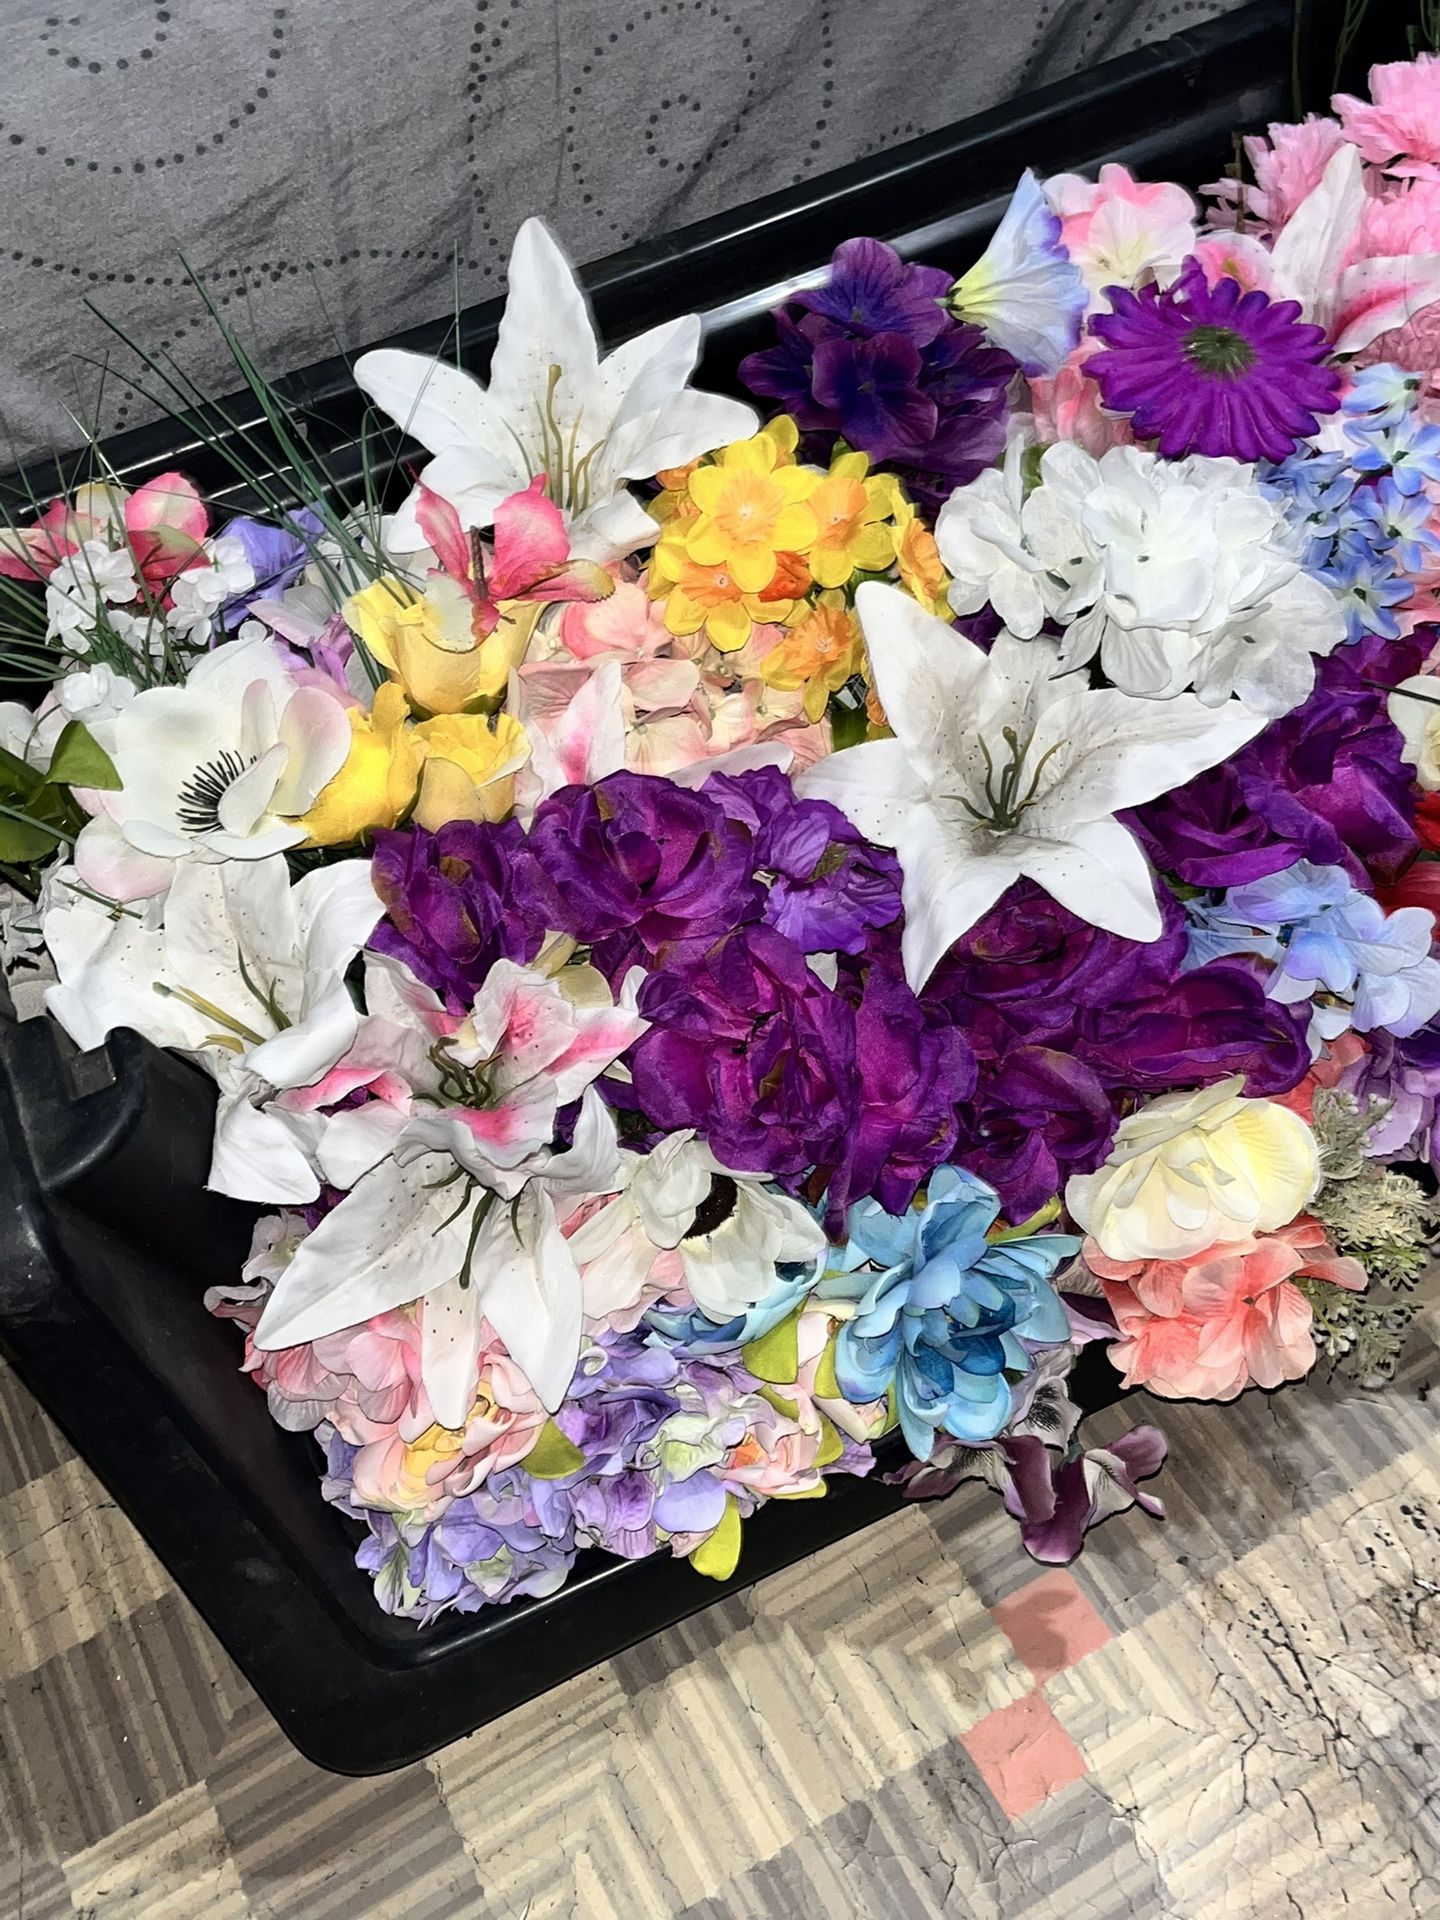 Lot Of Fake Flowers